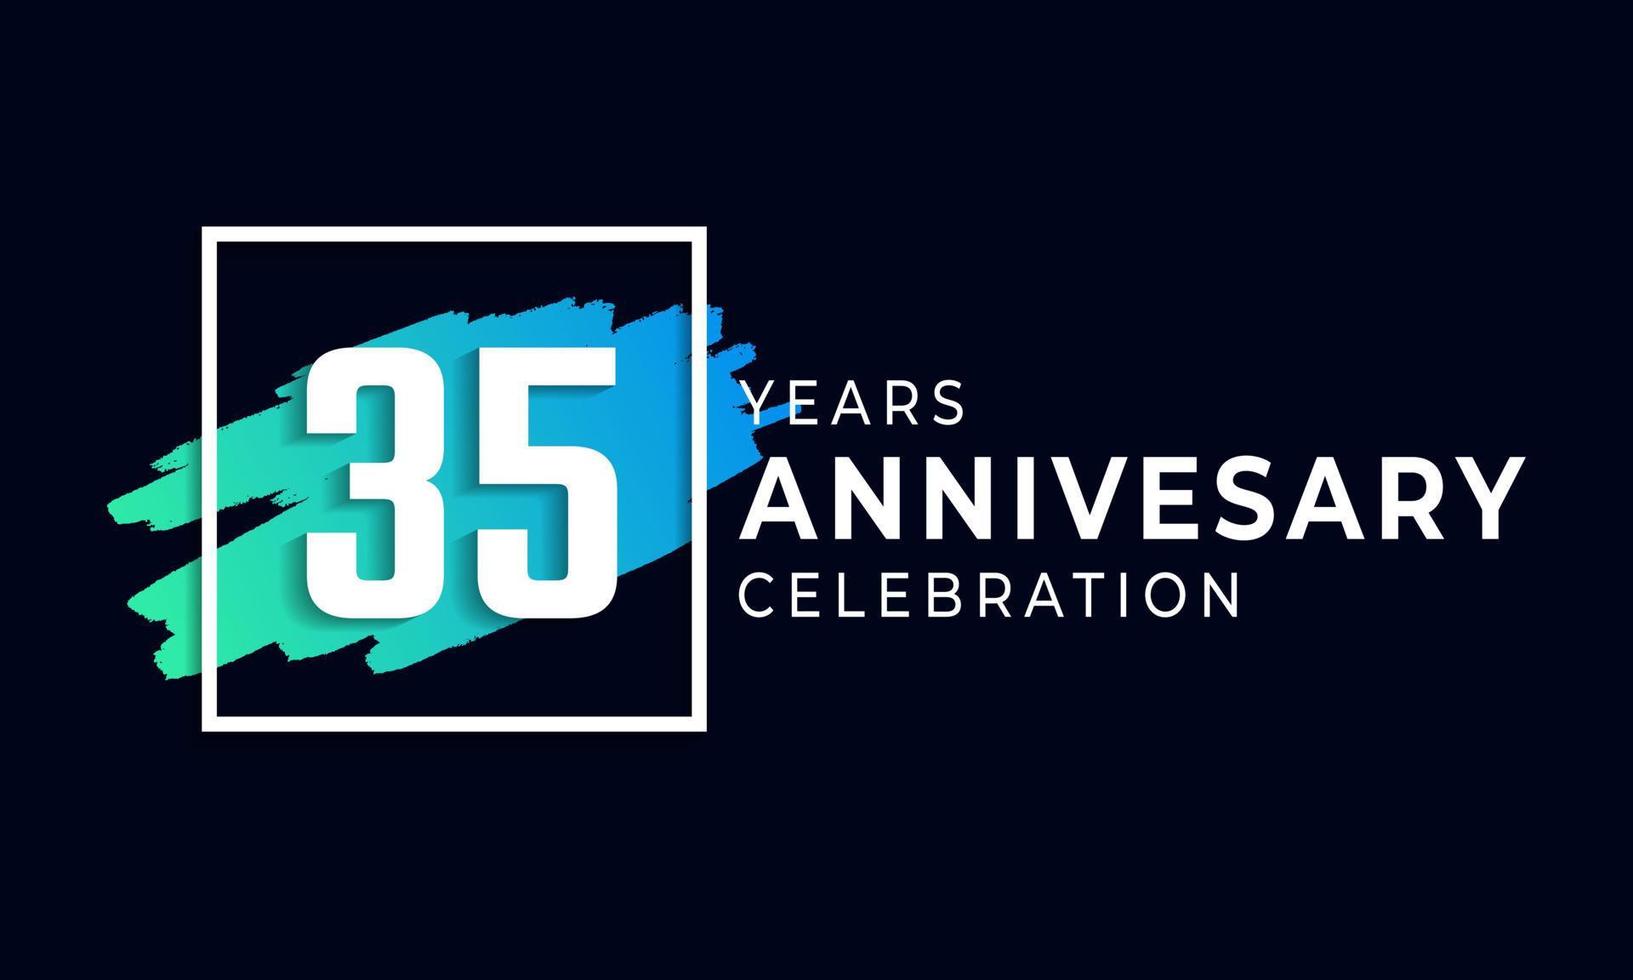 35 Anniversary Celebration with Blue Brush and Square Symbol. Happy Anniversary Greeting Celebrates Event Isolated on Black Background vector